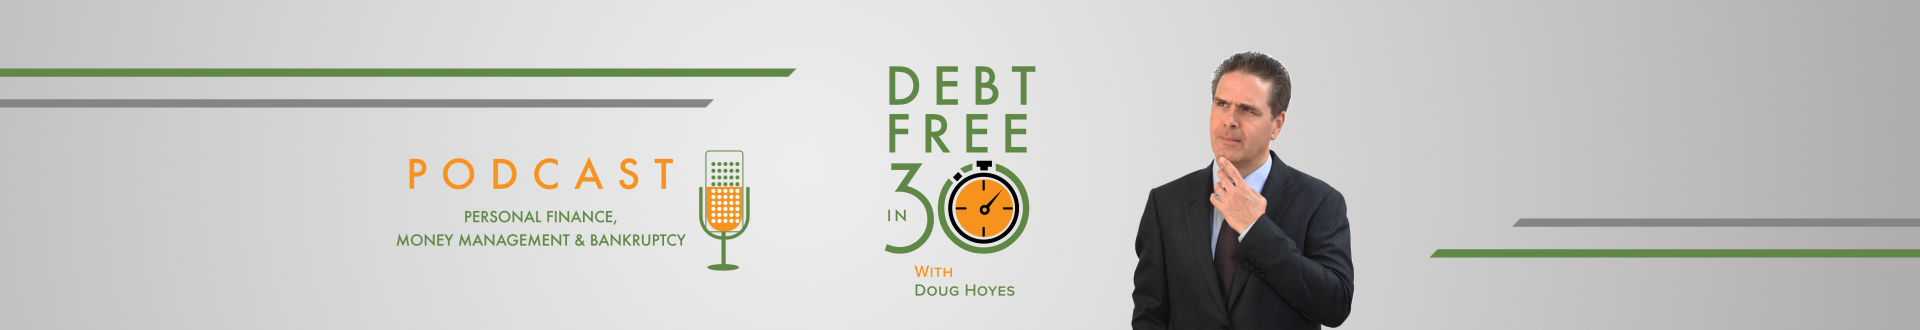 Debt Free in 30 Podcast Archive - Page 6